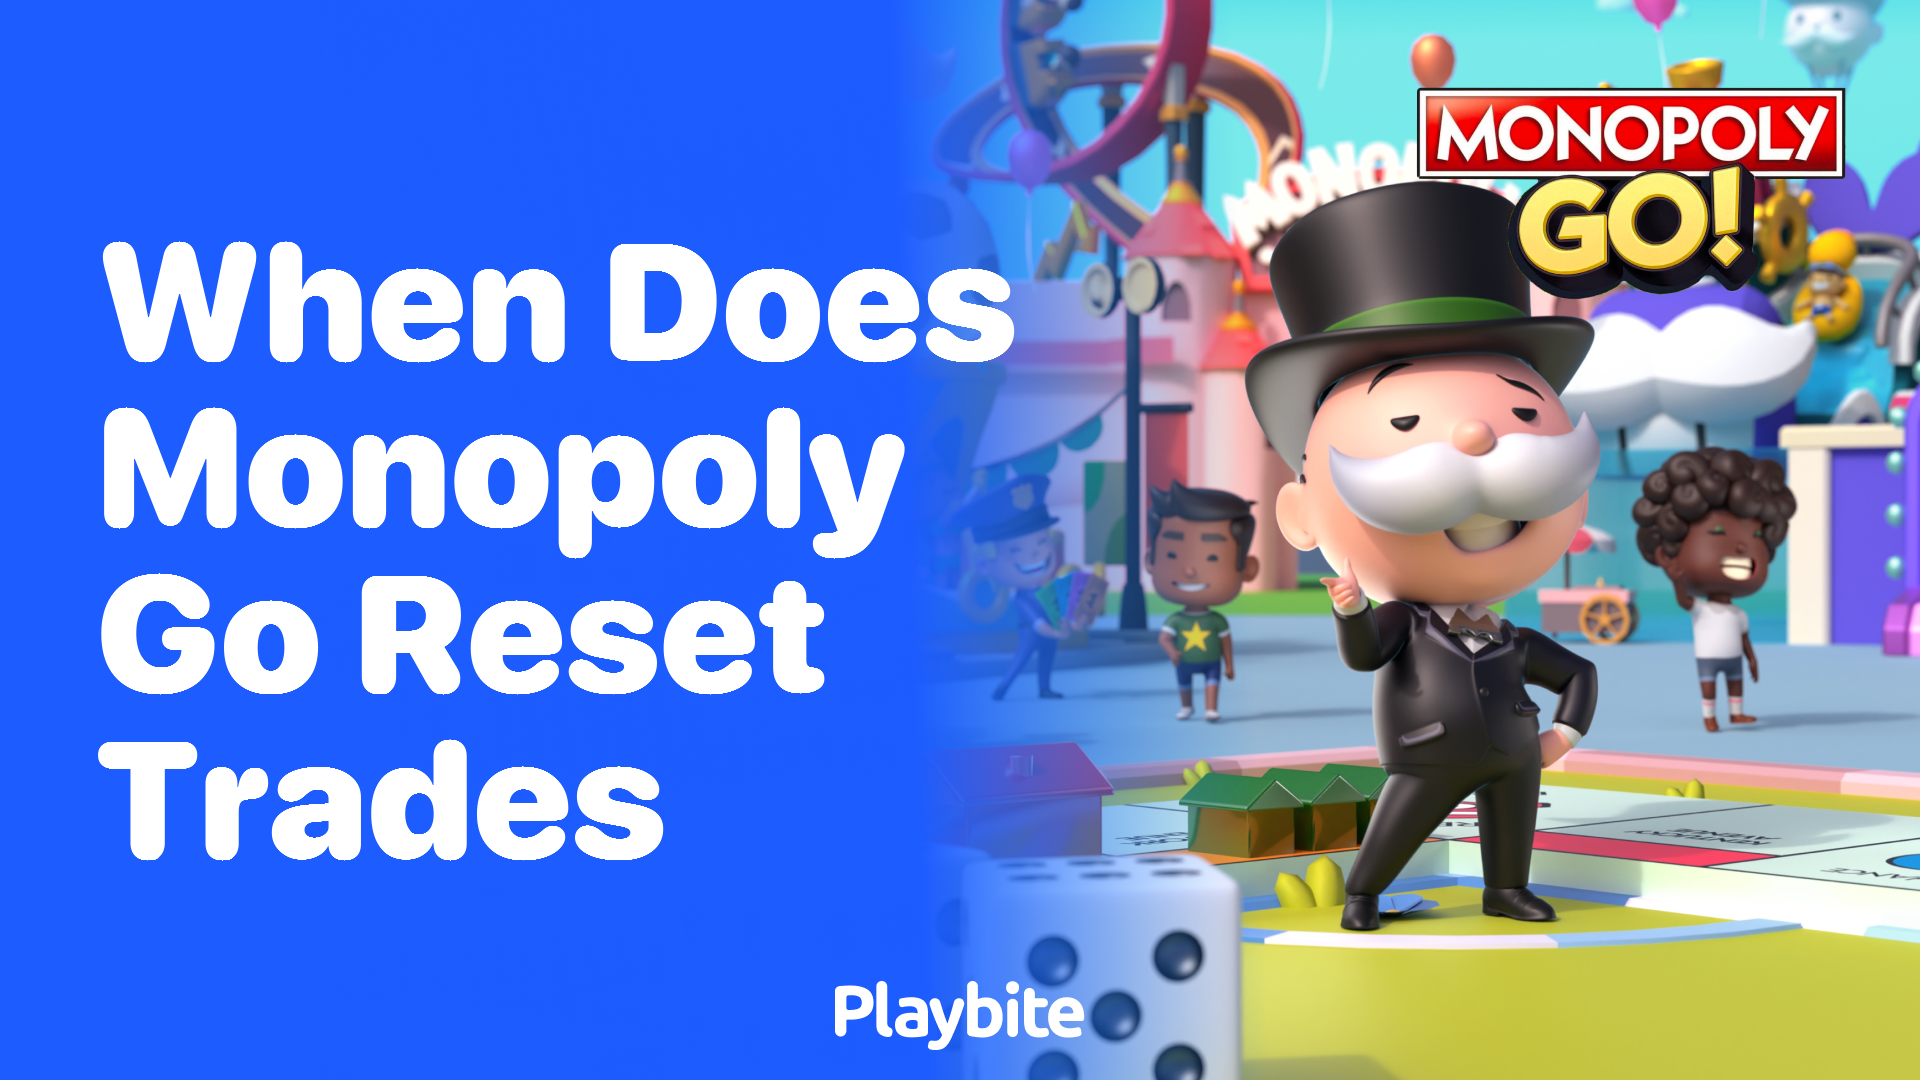 When Does Monopoly Go Reset Trades? Unveiling the Mystery